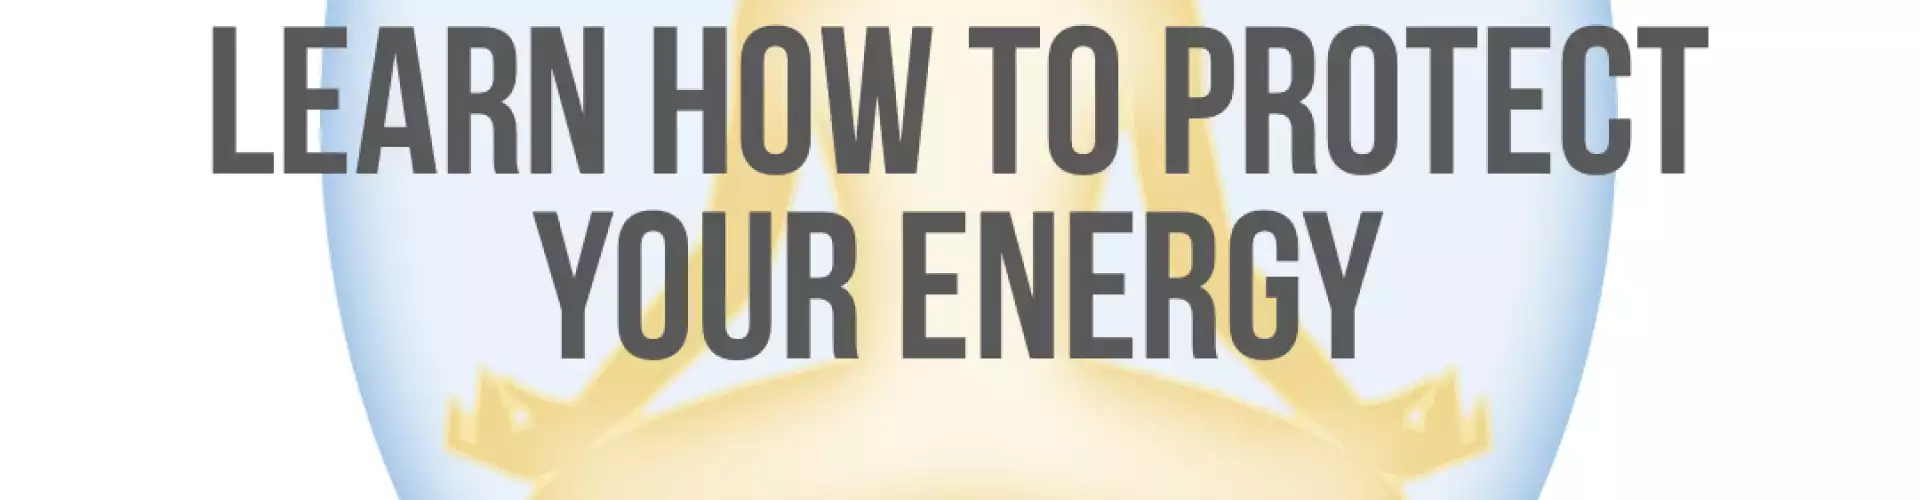 Back to Basics - Learn How to Protect Your Energy